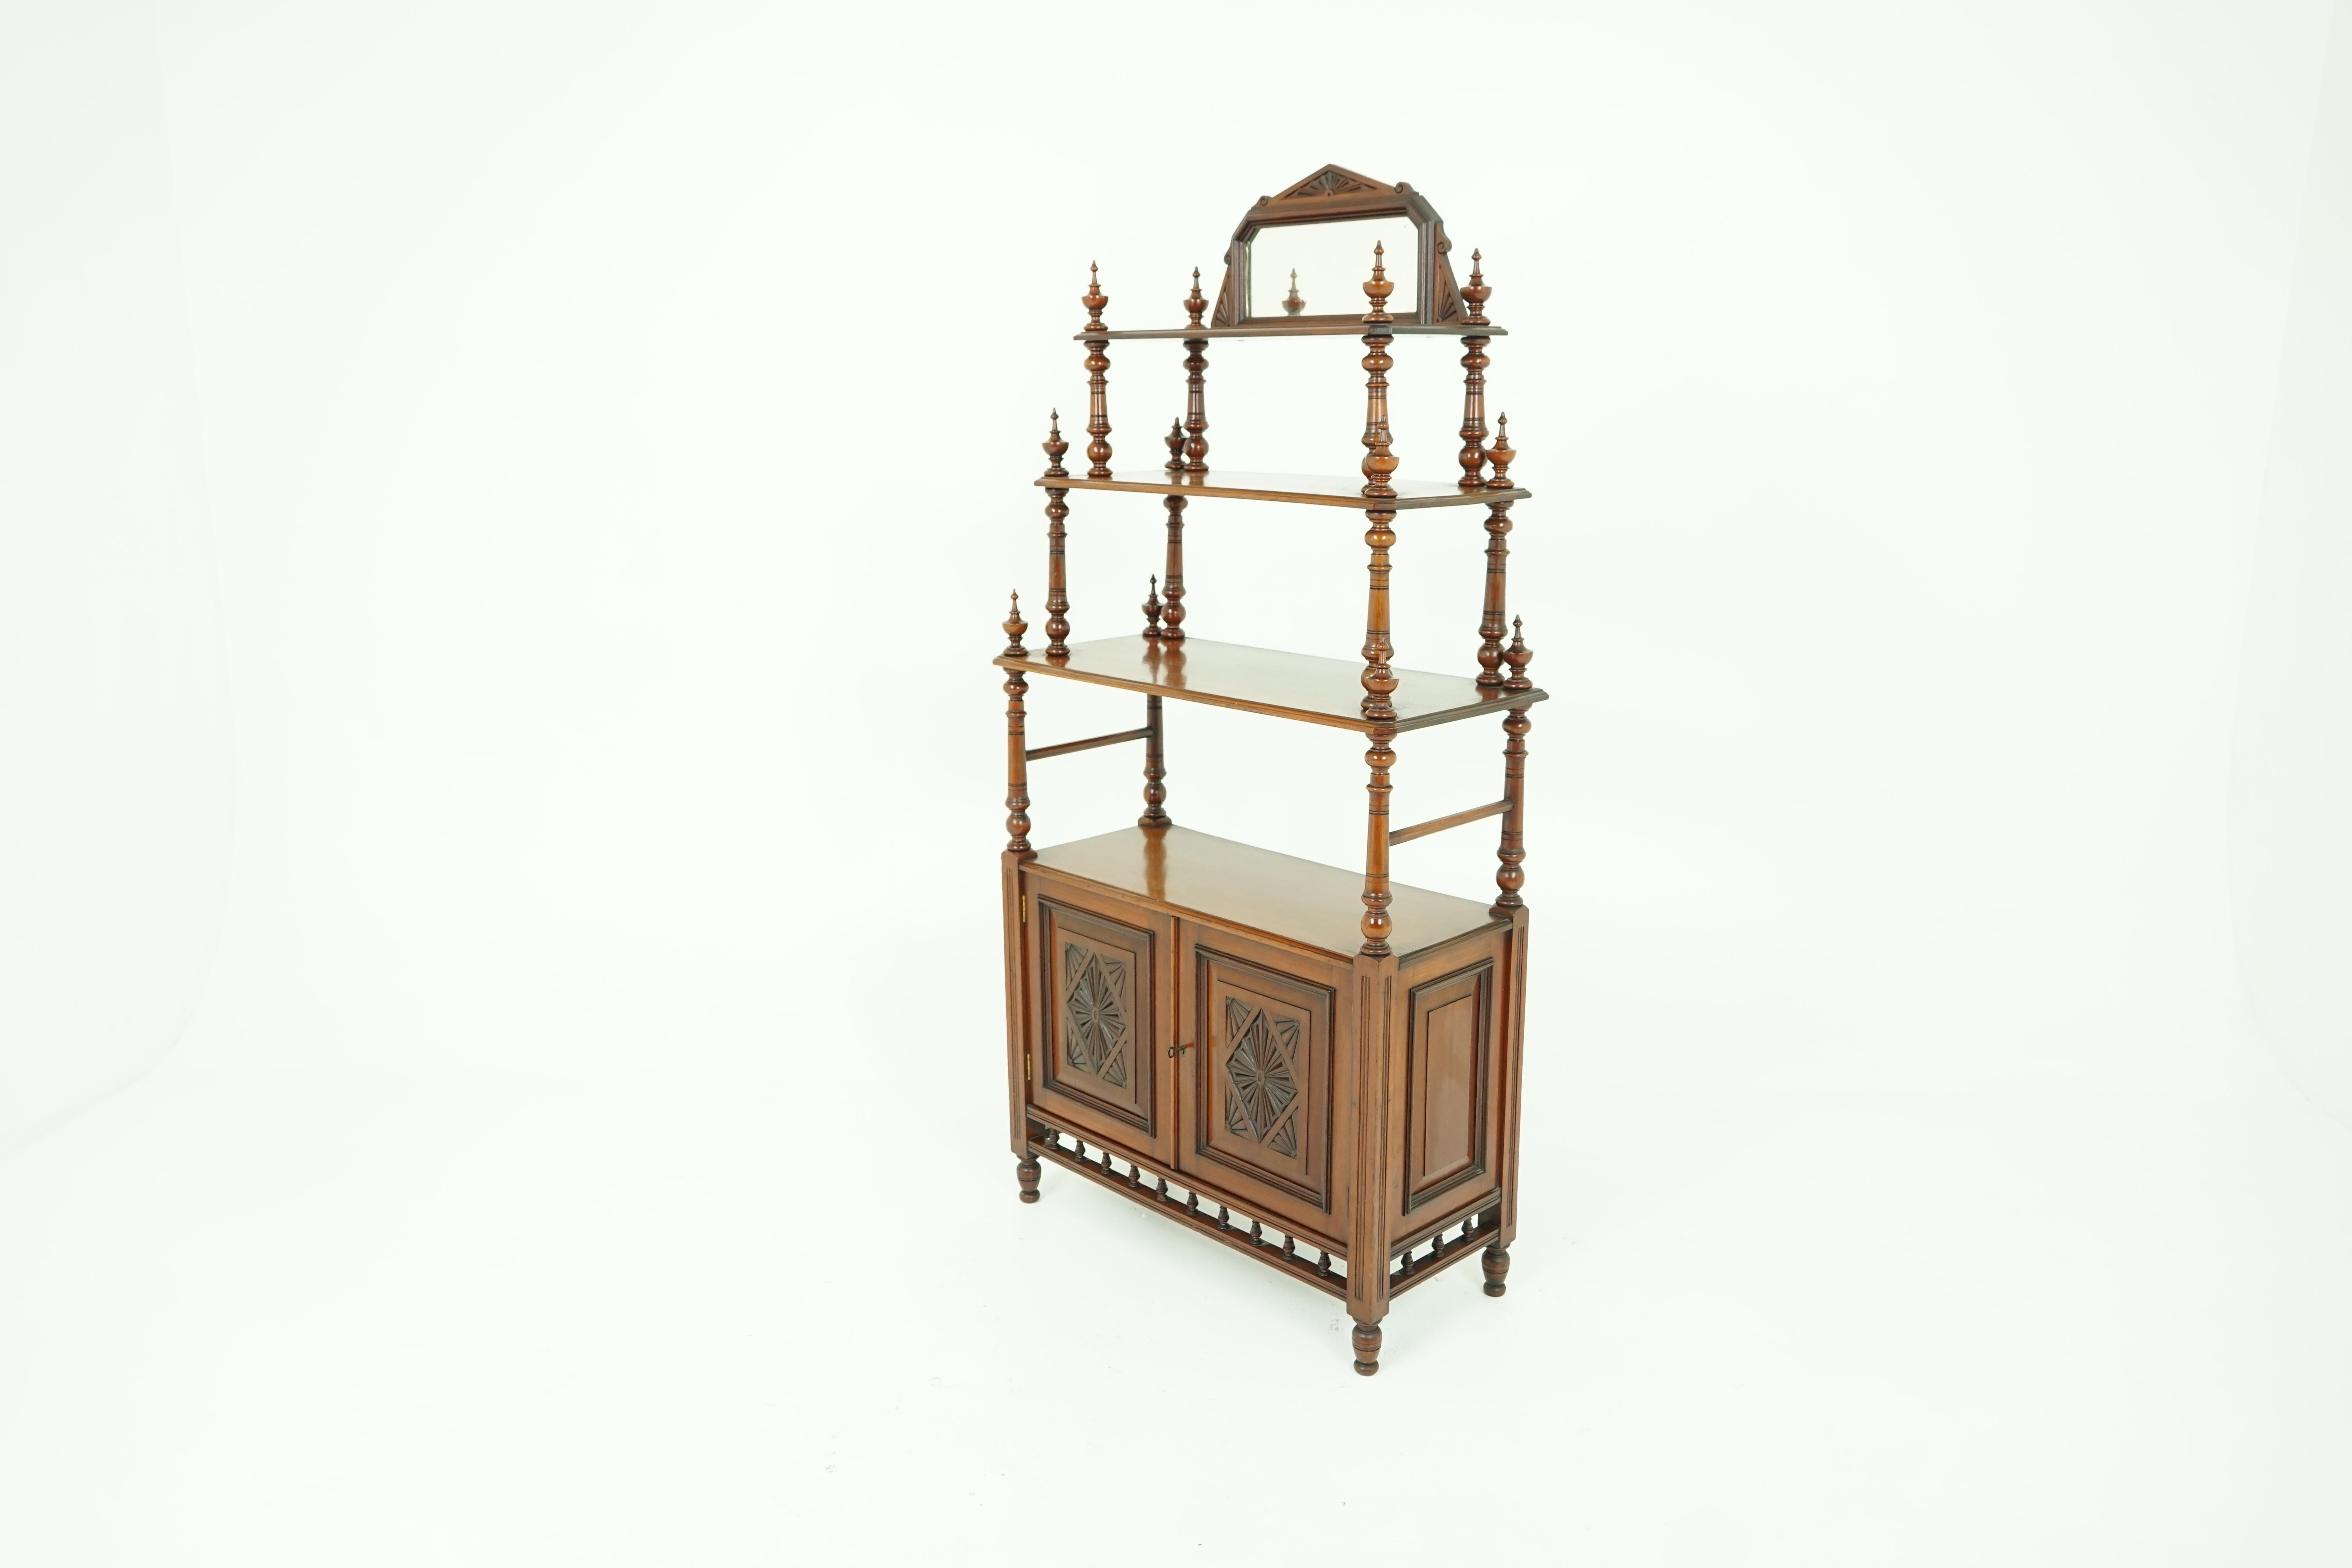 Antique walnut whatnot stand, victorian 4-tier display cabinet, antique furniture, Scotland 1880, B1811

Scotland 1880
Solid walnut
Original finish
Mirrored back on top
Shelf underneath
Turned supports with finials on top
Wider and deeper